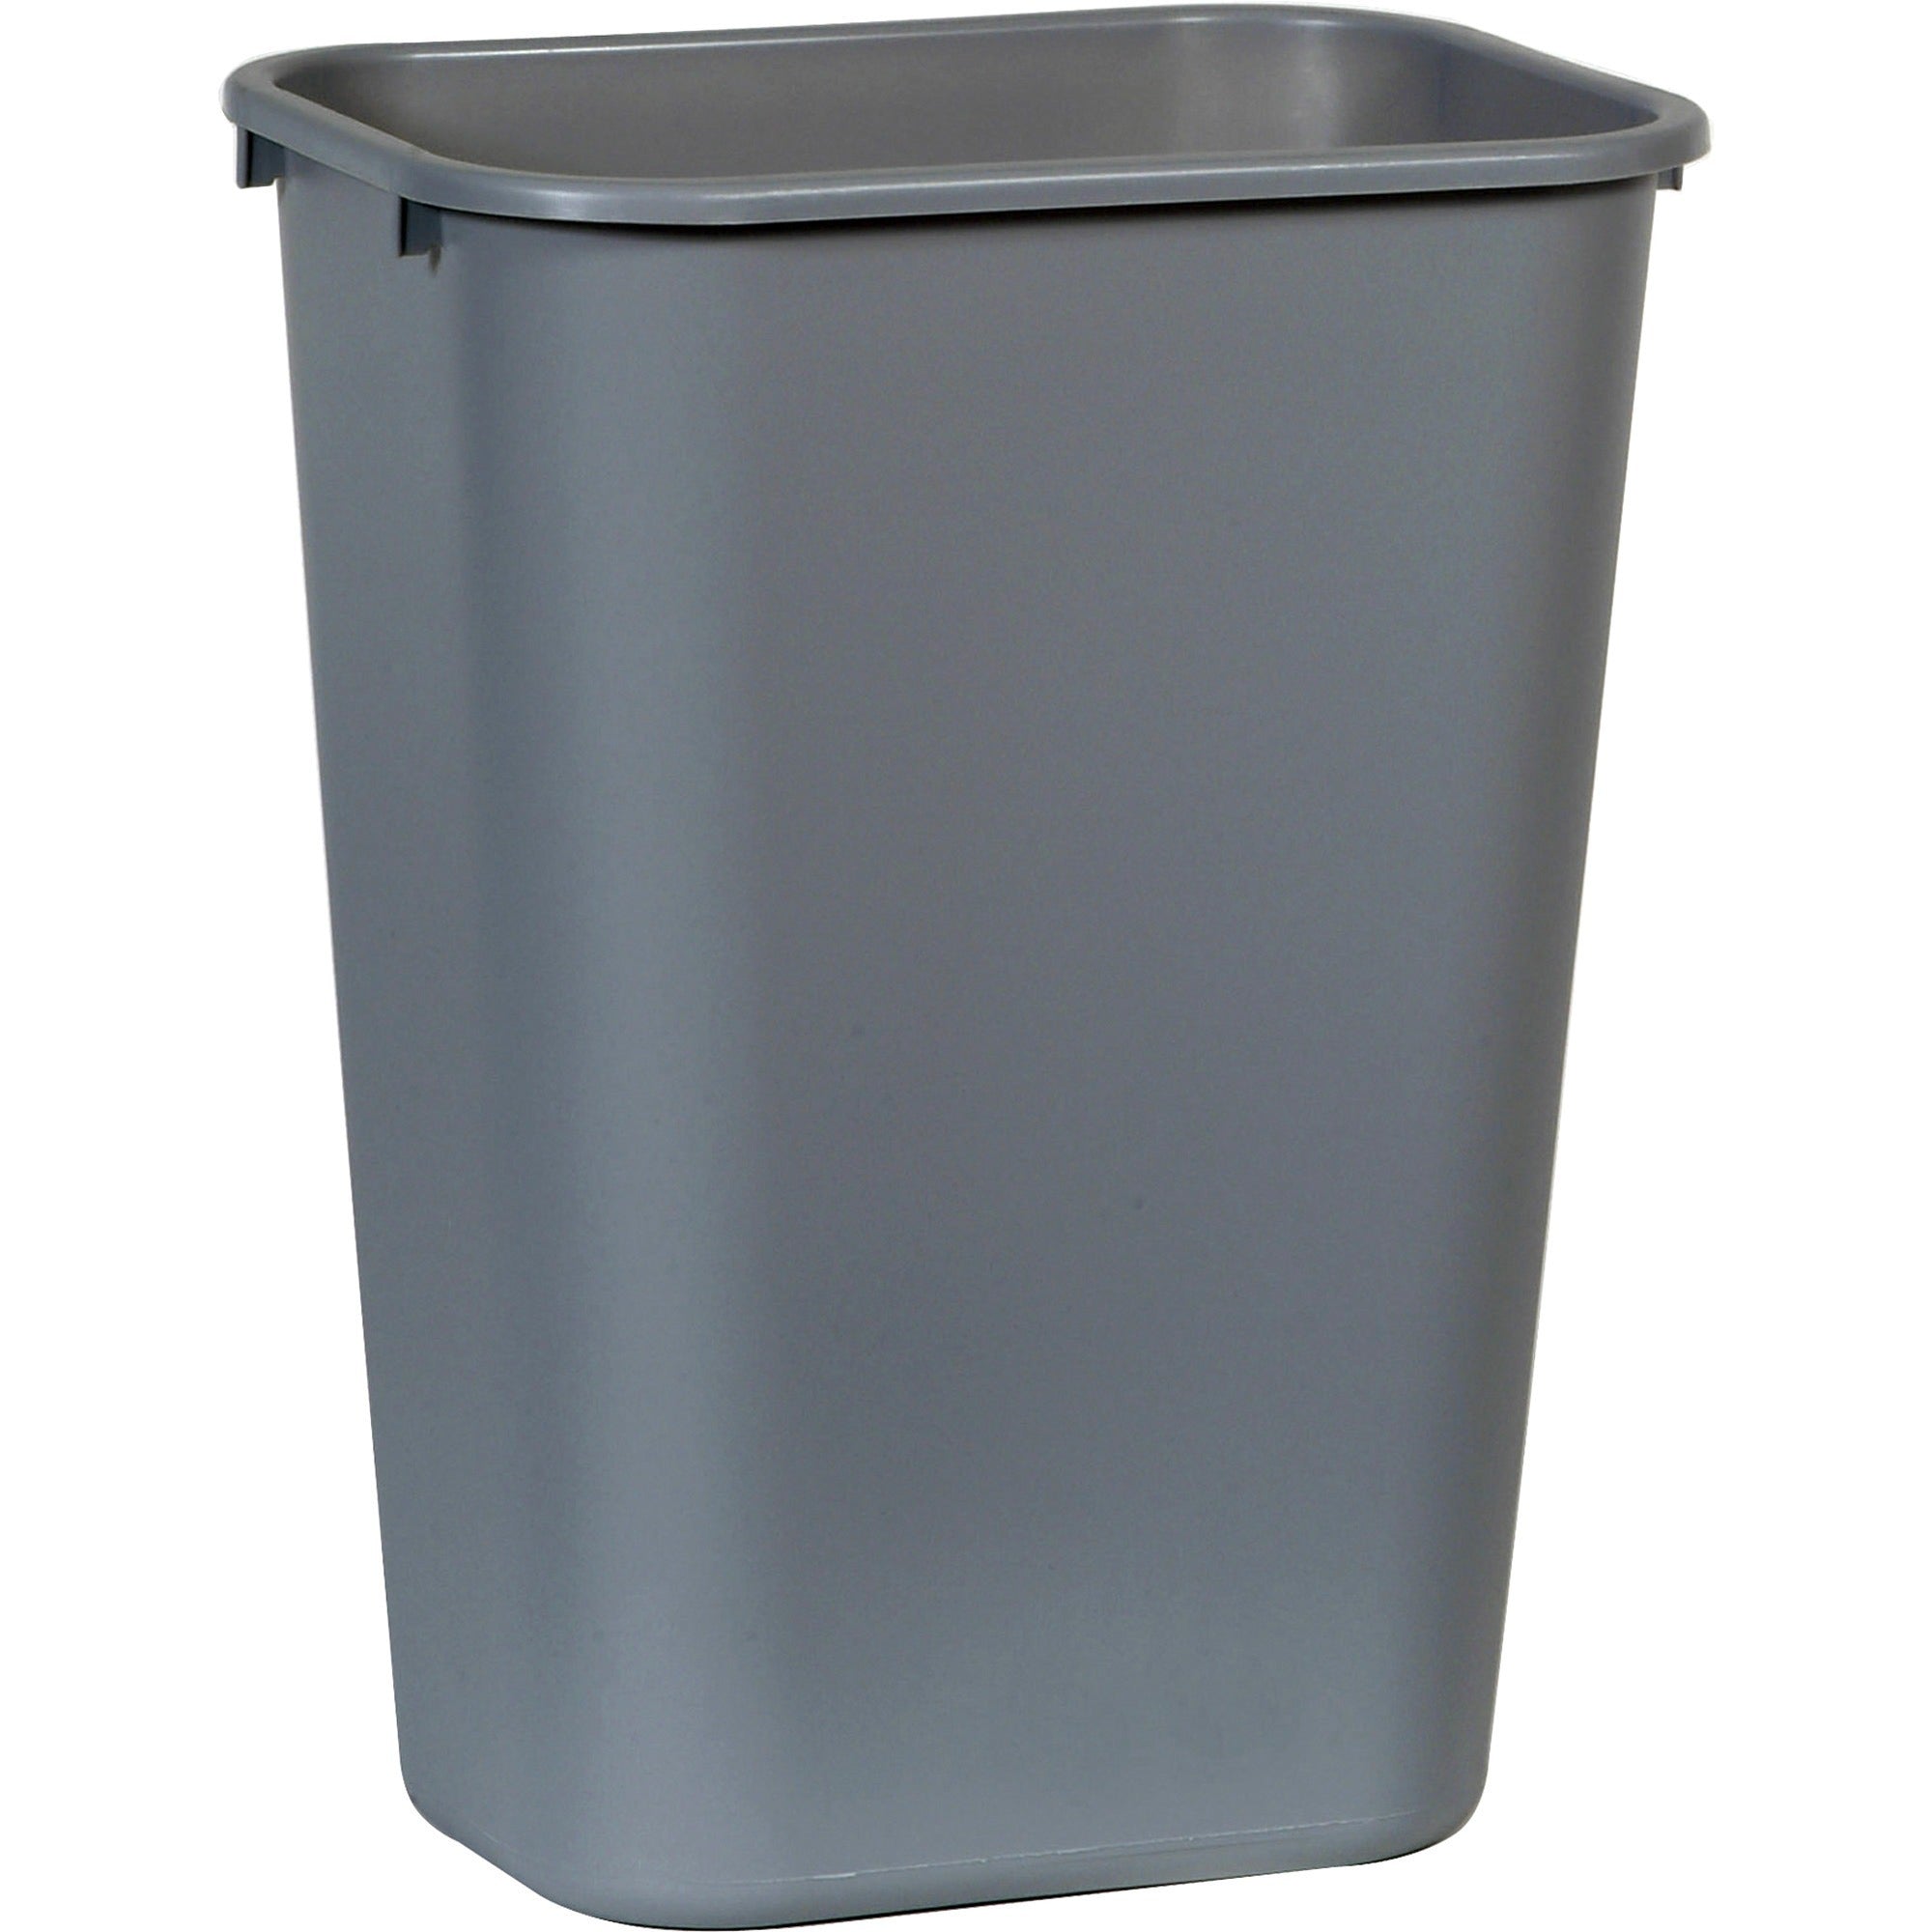 rubbermaid-commercial-41-qt-large-deskside-wastebaskets-1025-gal-capacity-rectangular-dent-resistant-durable-rust-resistant-easy-to-clean-20-height-x-113-width-x-153-depth-plastic-gray-12-carton_rcp295700gyct - 1